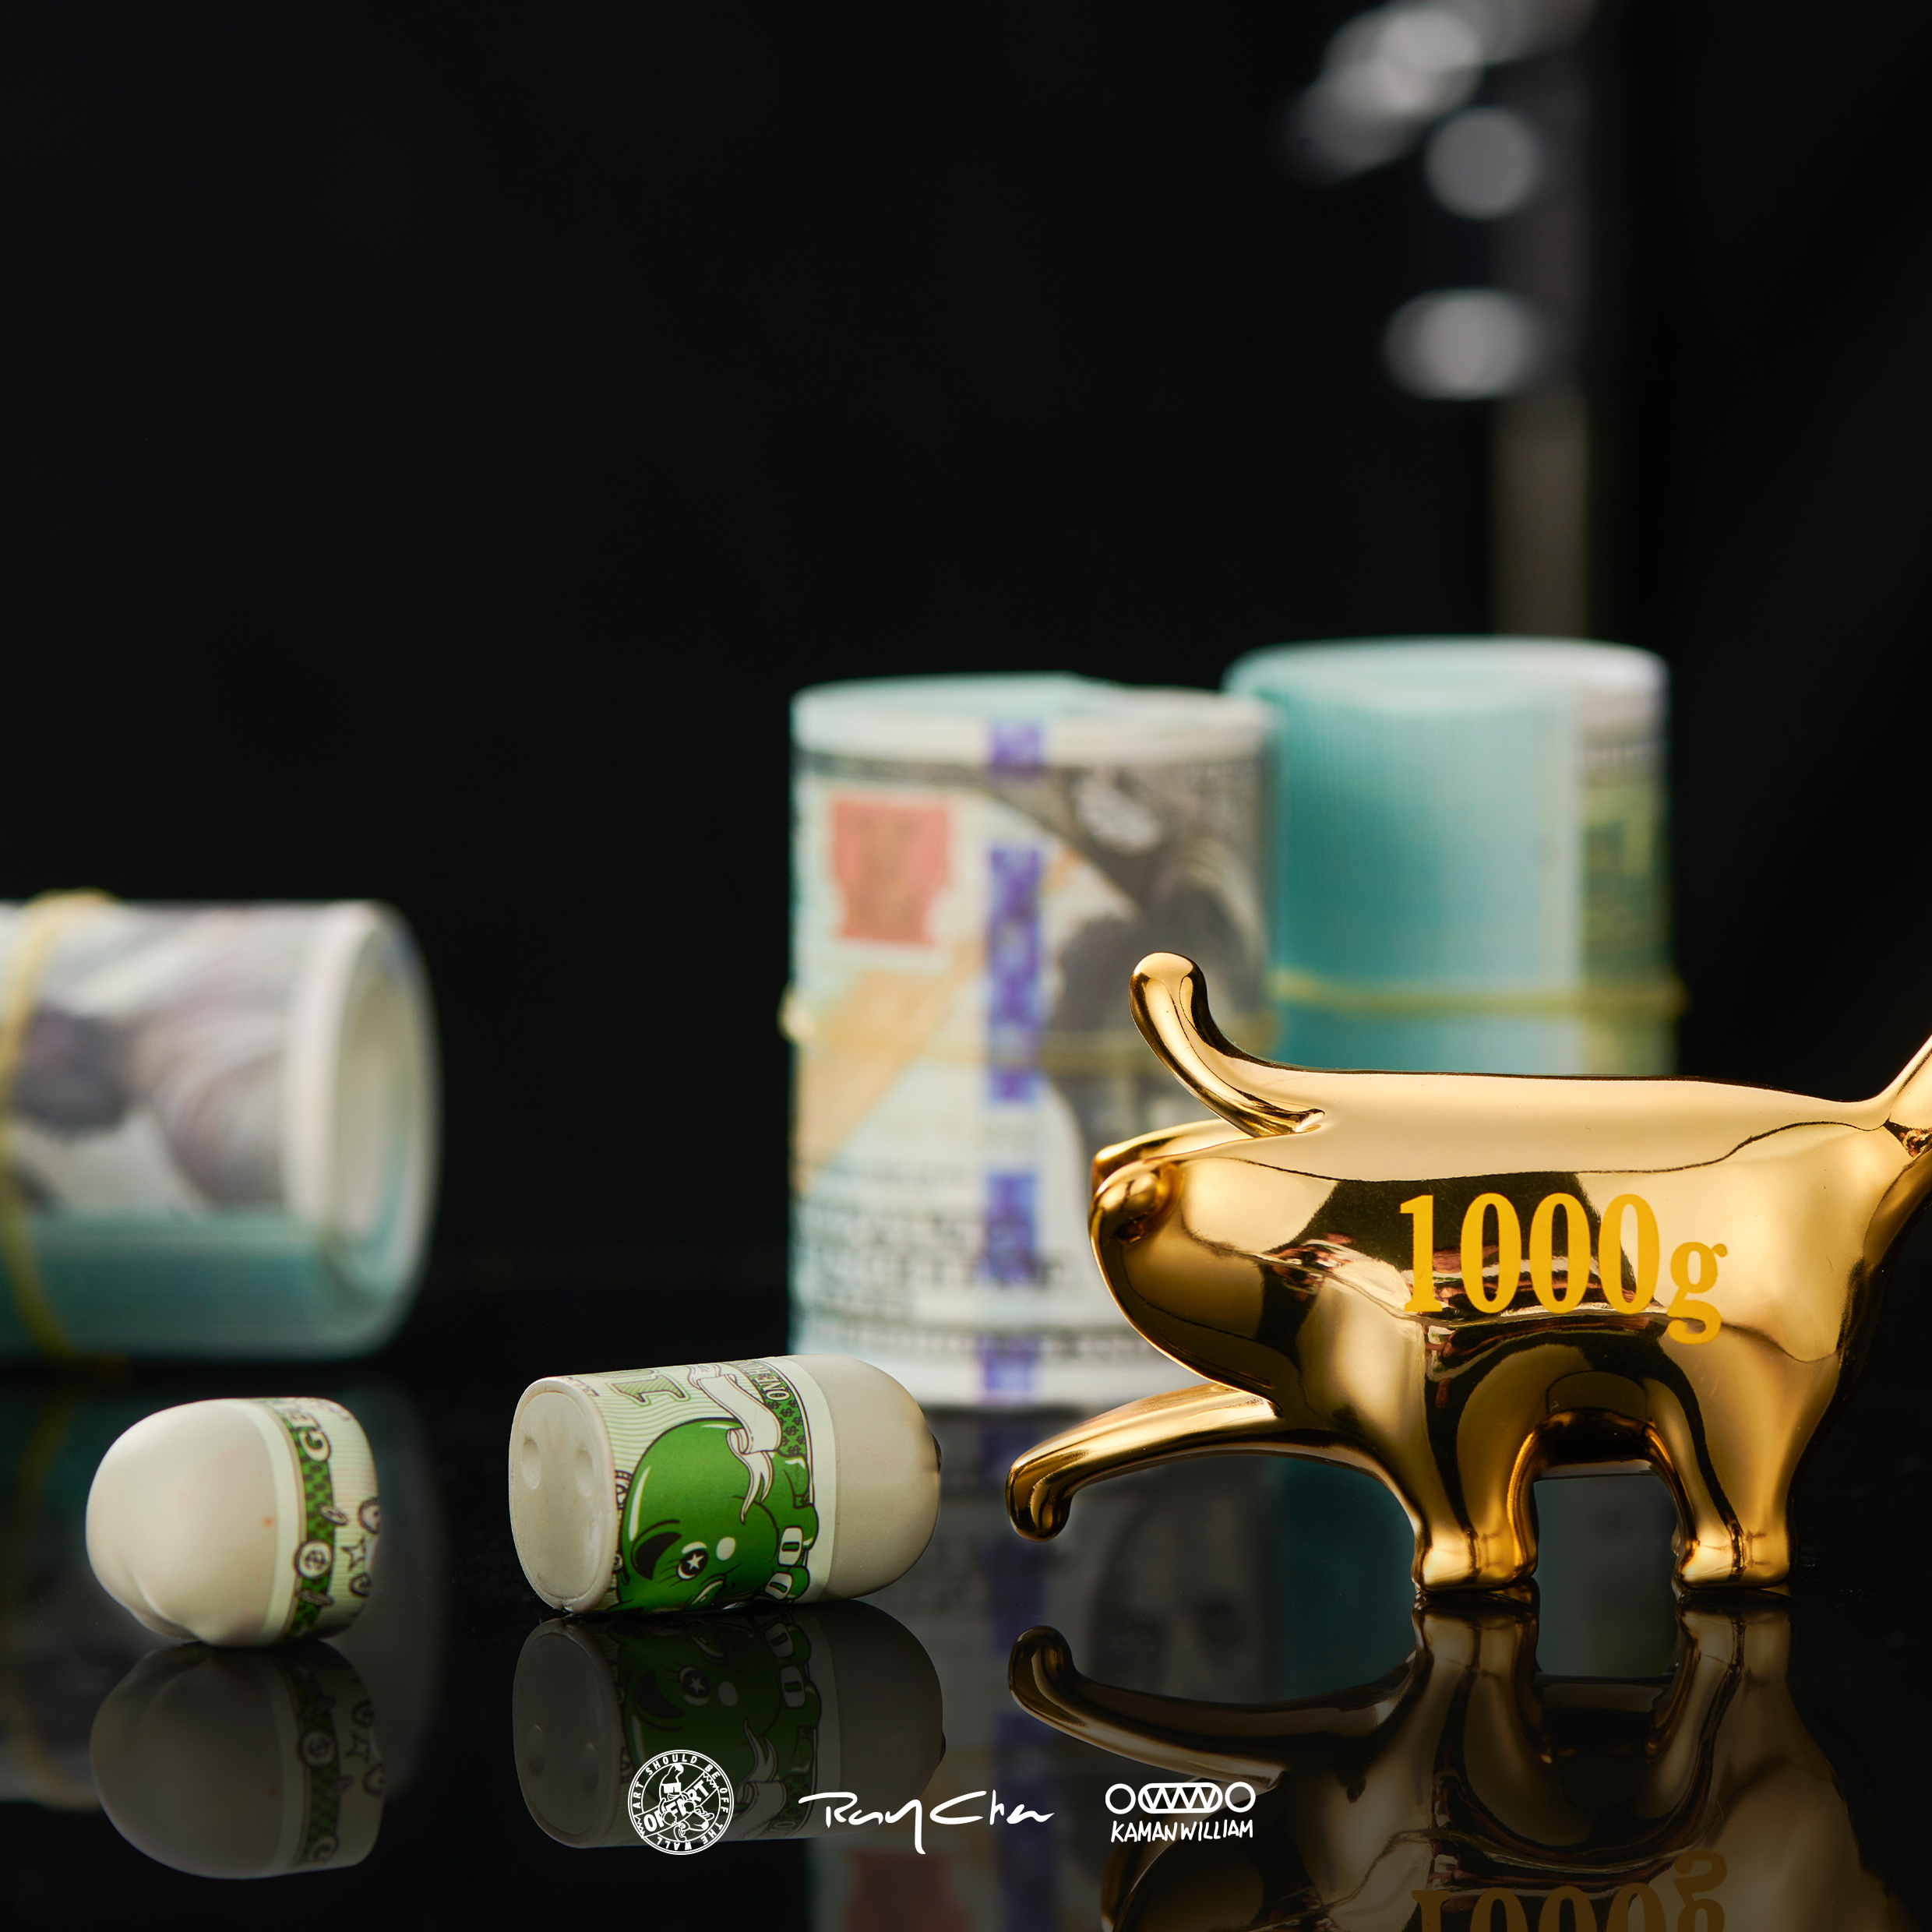 A blind box and art toy store's OFFART X Kamanwillam Bananaer Dog Mini Gold Edition: a gold dog figurine with a number, next to rolled money, featuring a magnetically detachable small banana pulp.